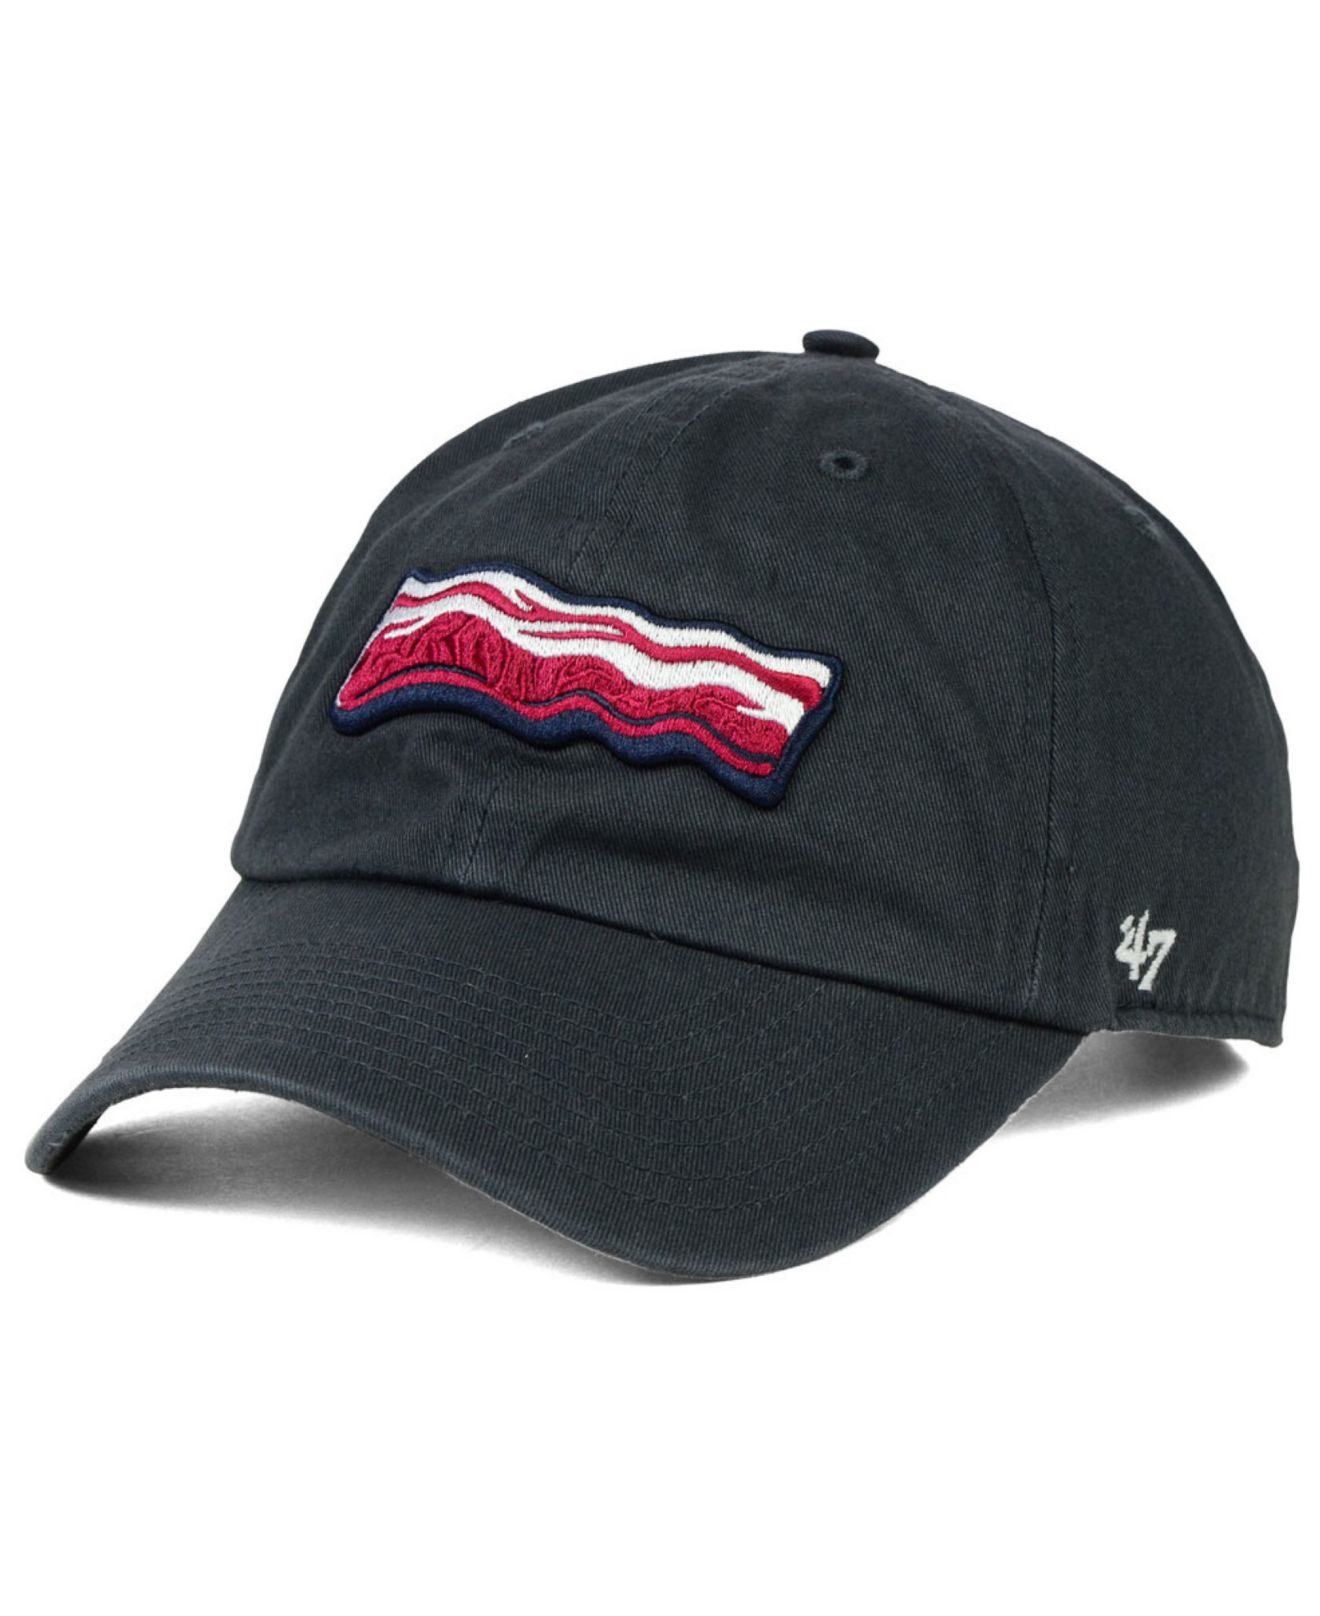 Lyst - 47 Brand Lehigh Valley Ironpigs Clean Up Cap in Gray for Men